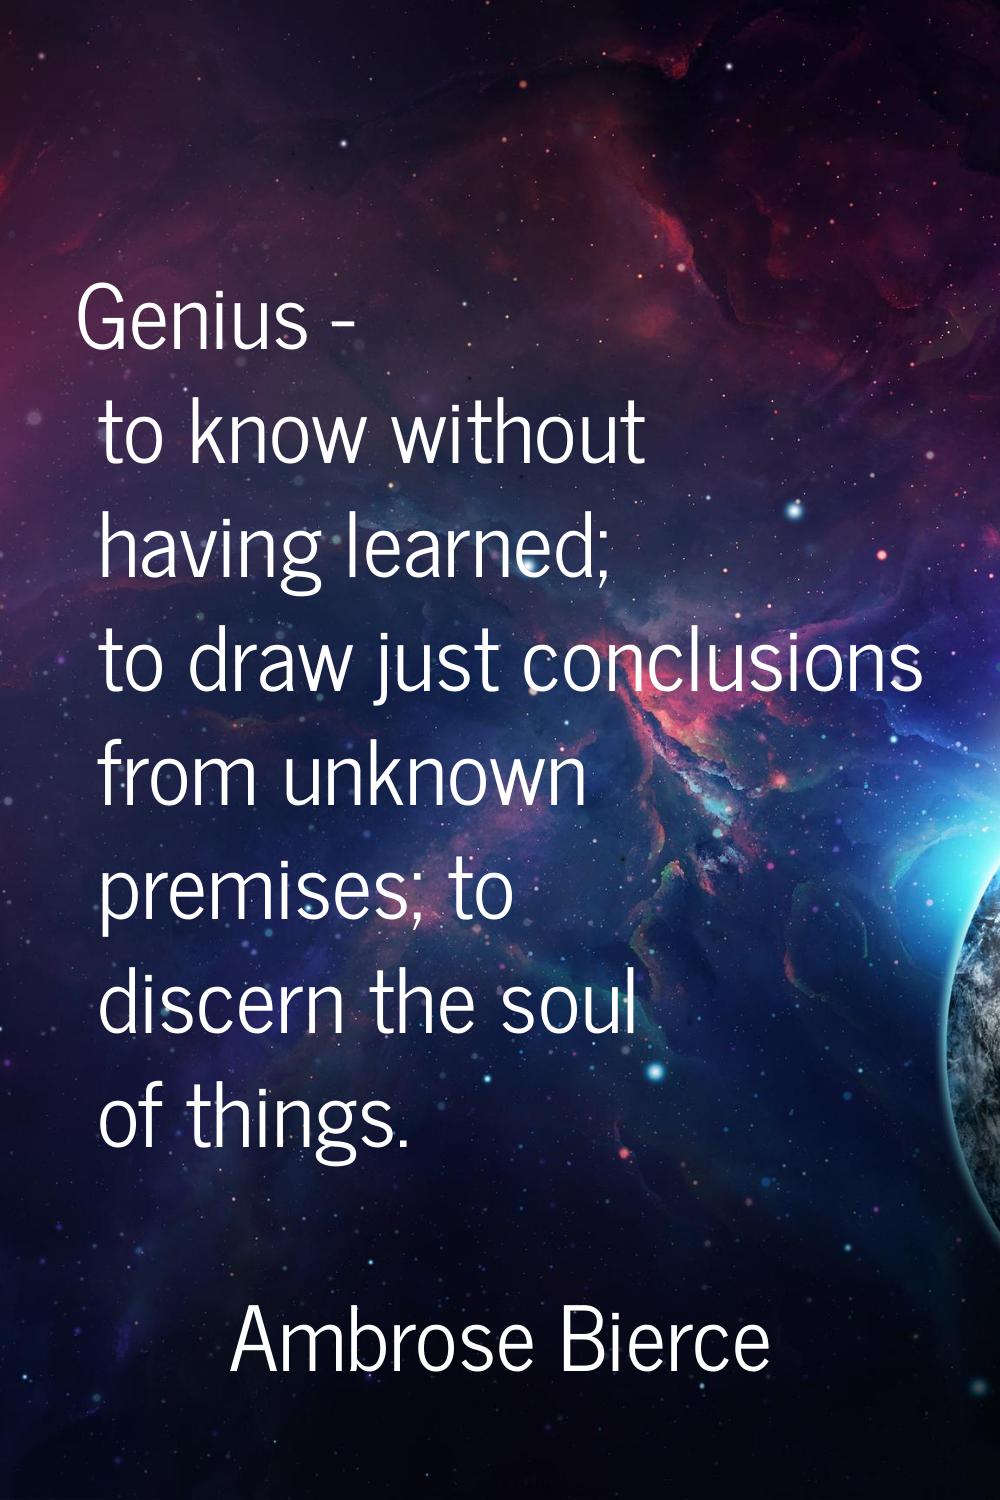 Genius - to know without having learned; to draw just conclusions from unknown premises; to discern